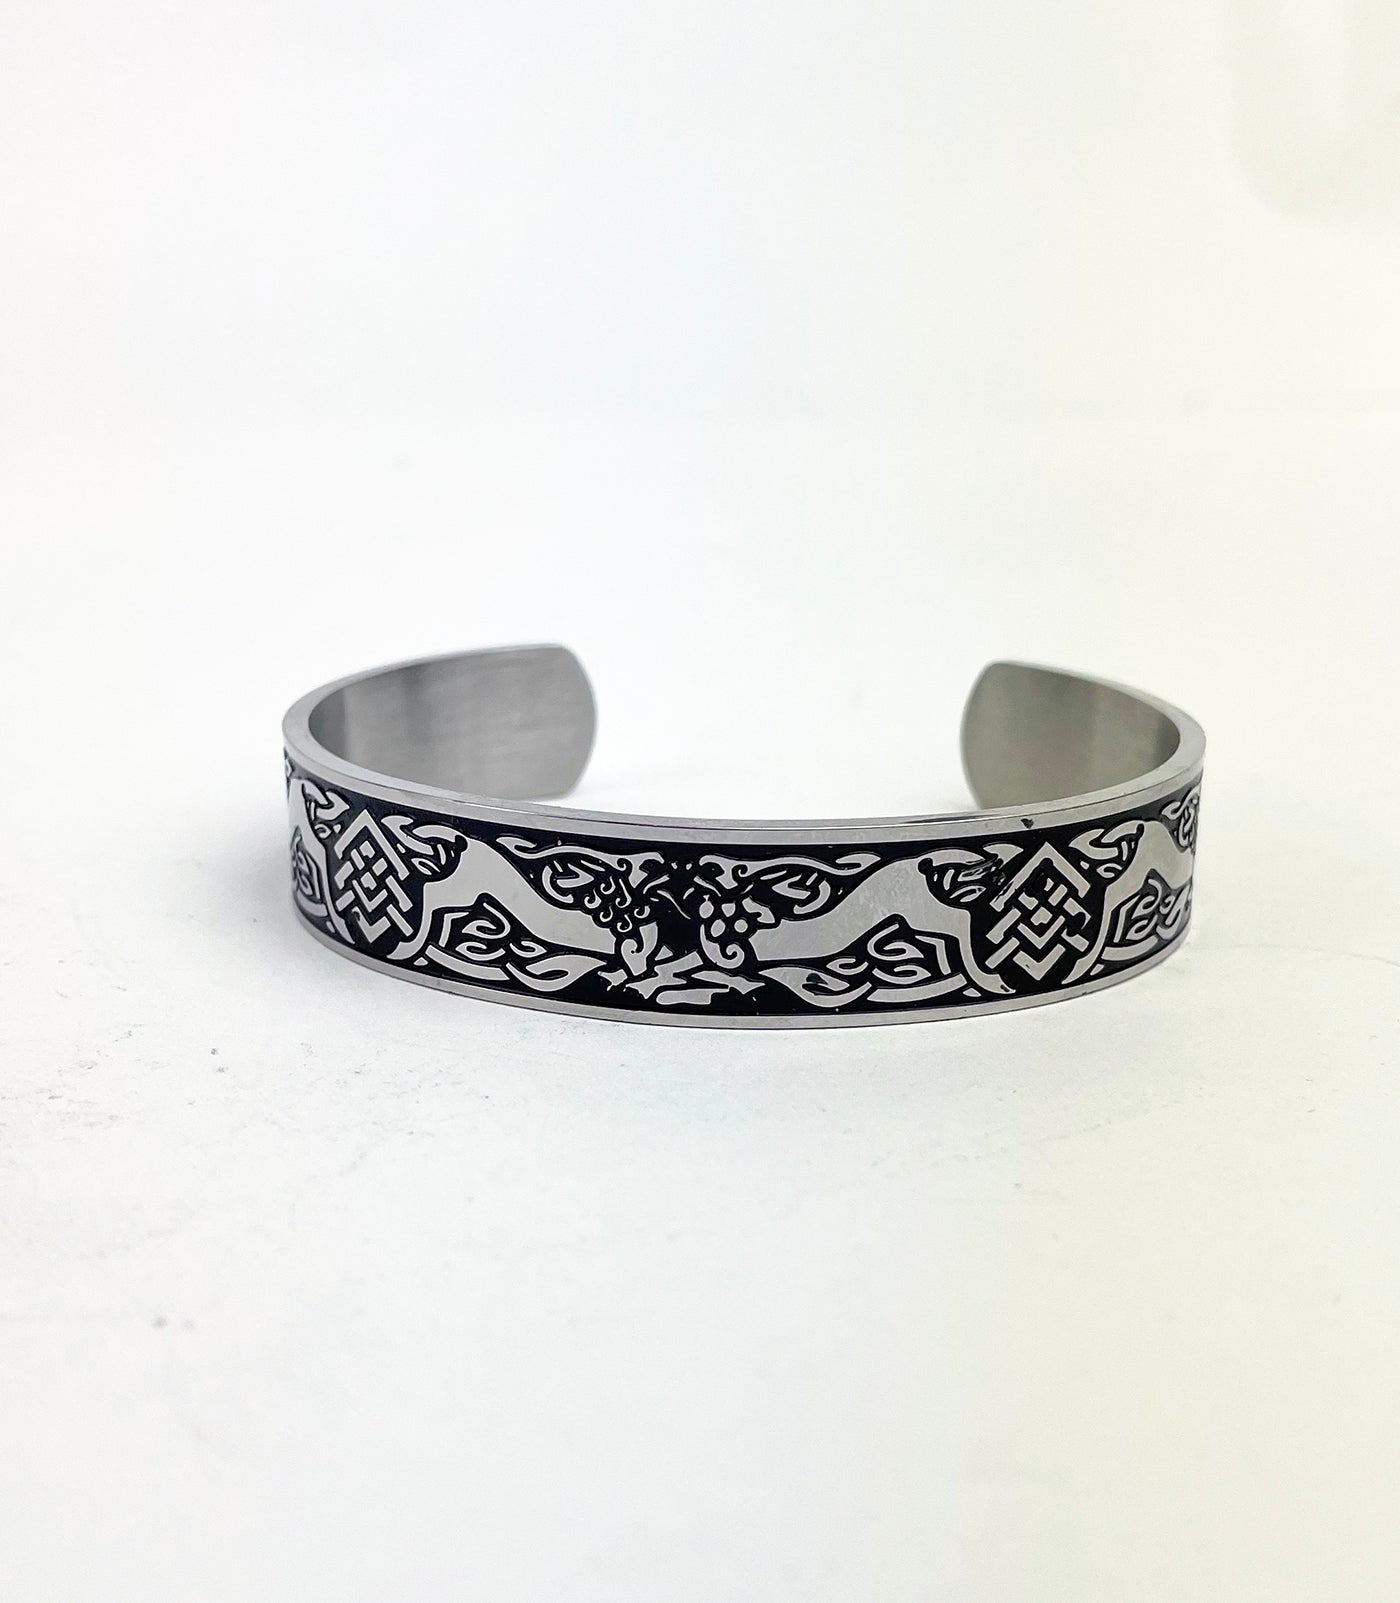 Men's Stainless Steel Cuff Bracelet with Celtic Wolfhounds